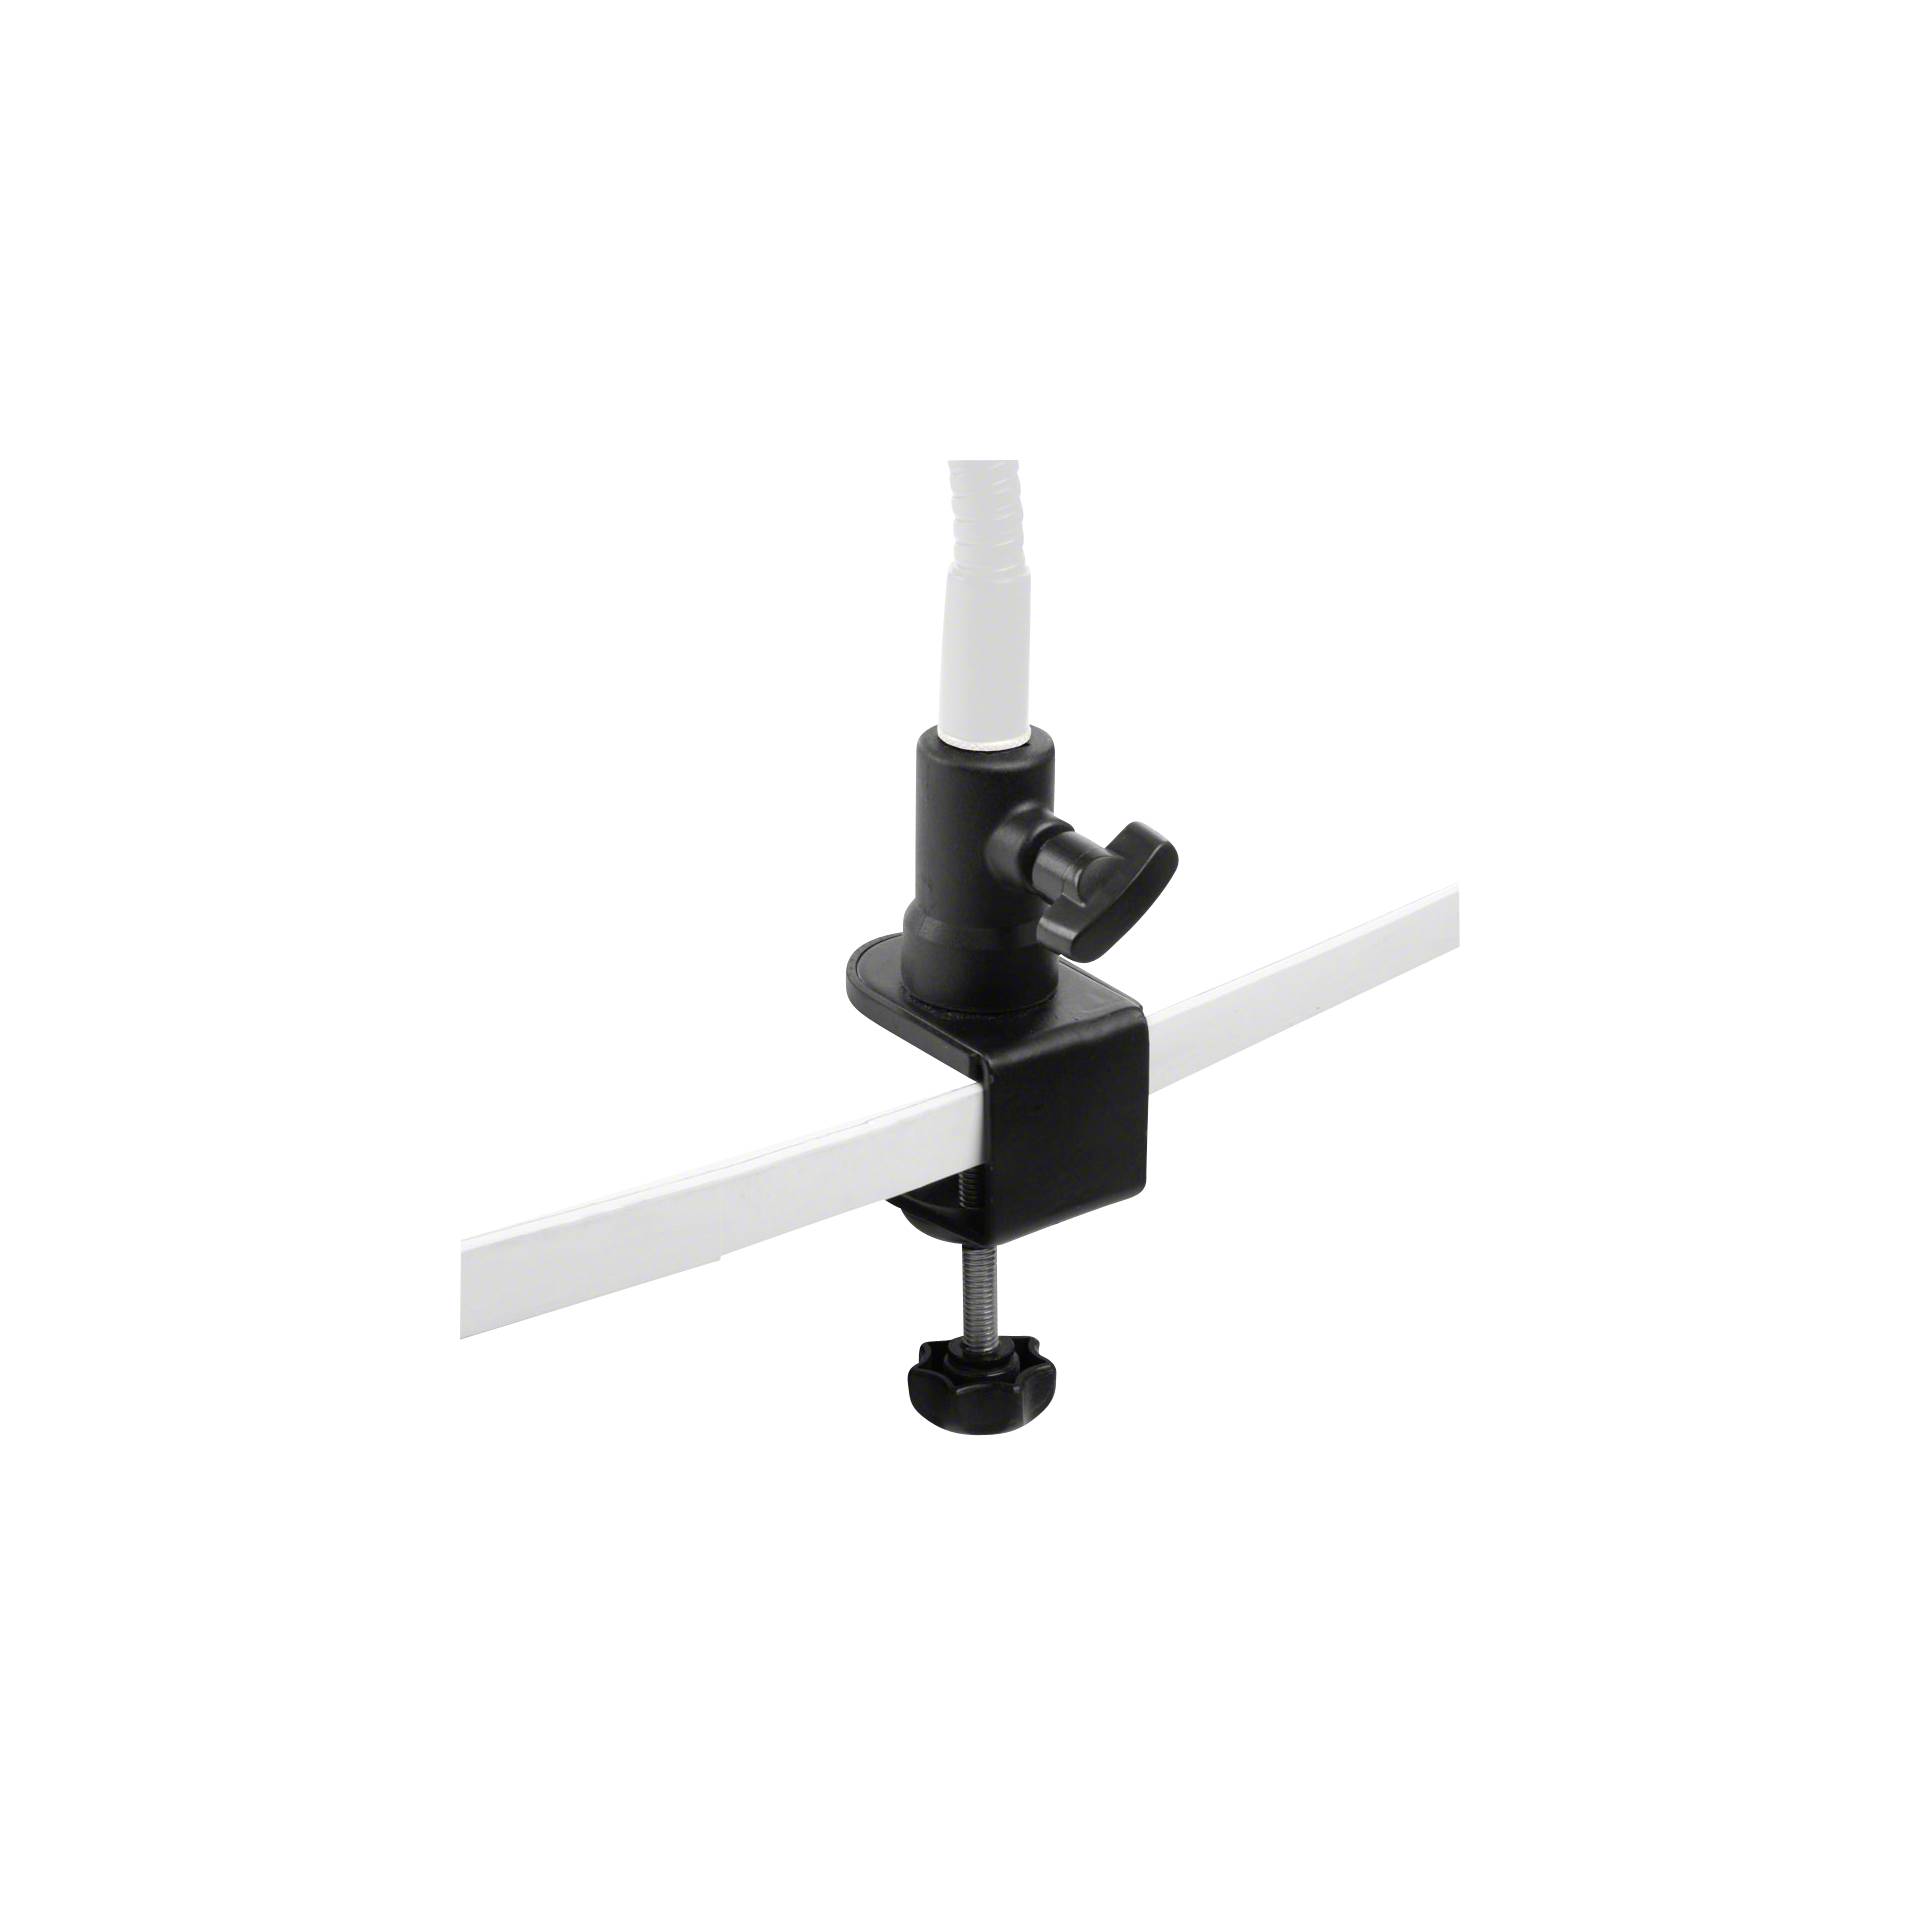 walimex Screw Clamp with Spigot mounting